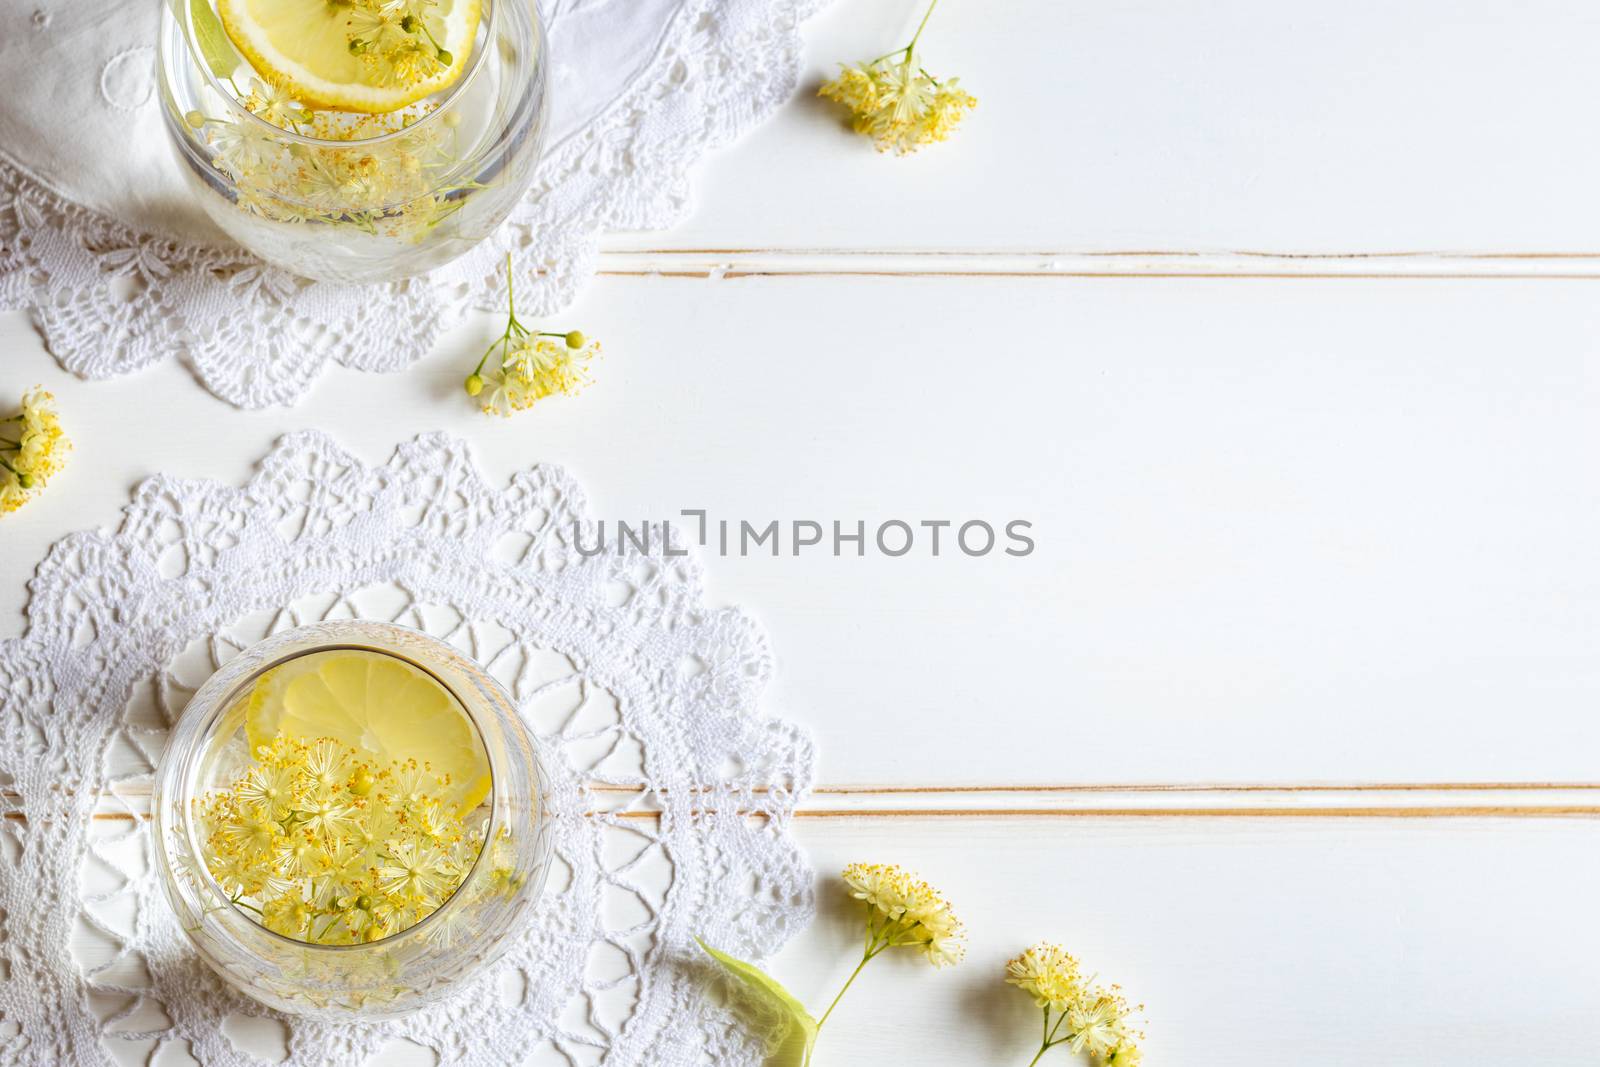 Homemade lemonade with fresh linden flowers and lemon slices, with copy space